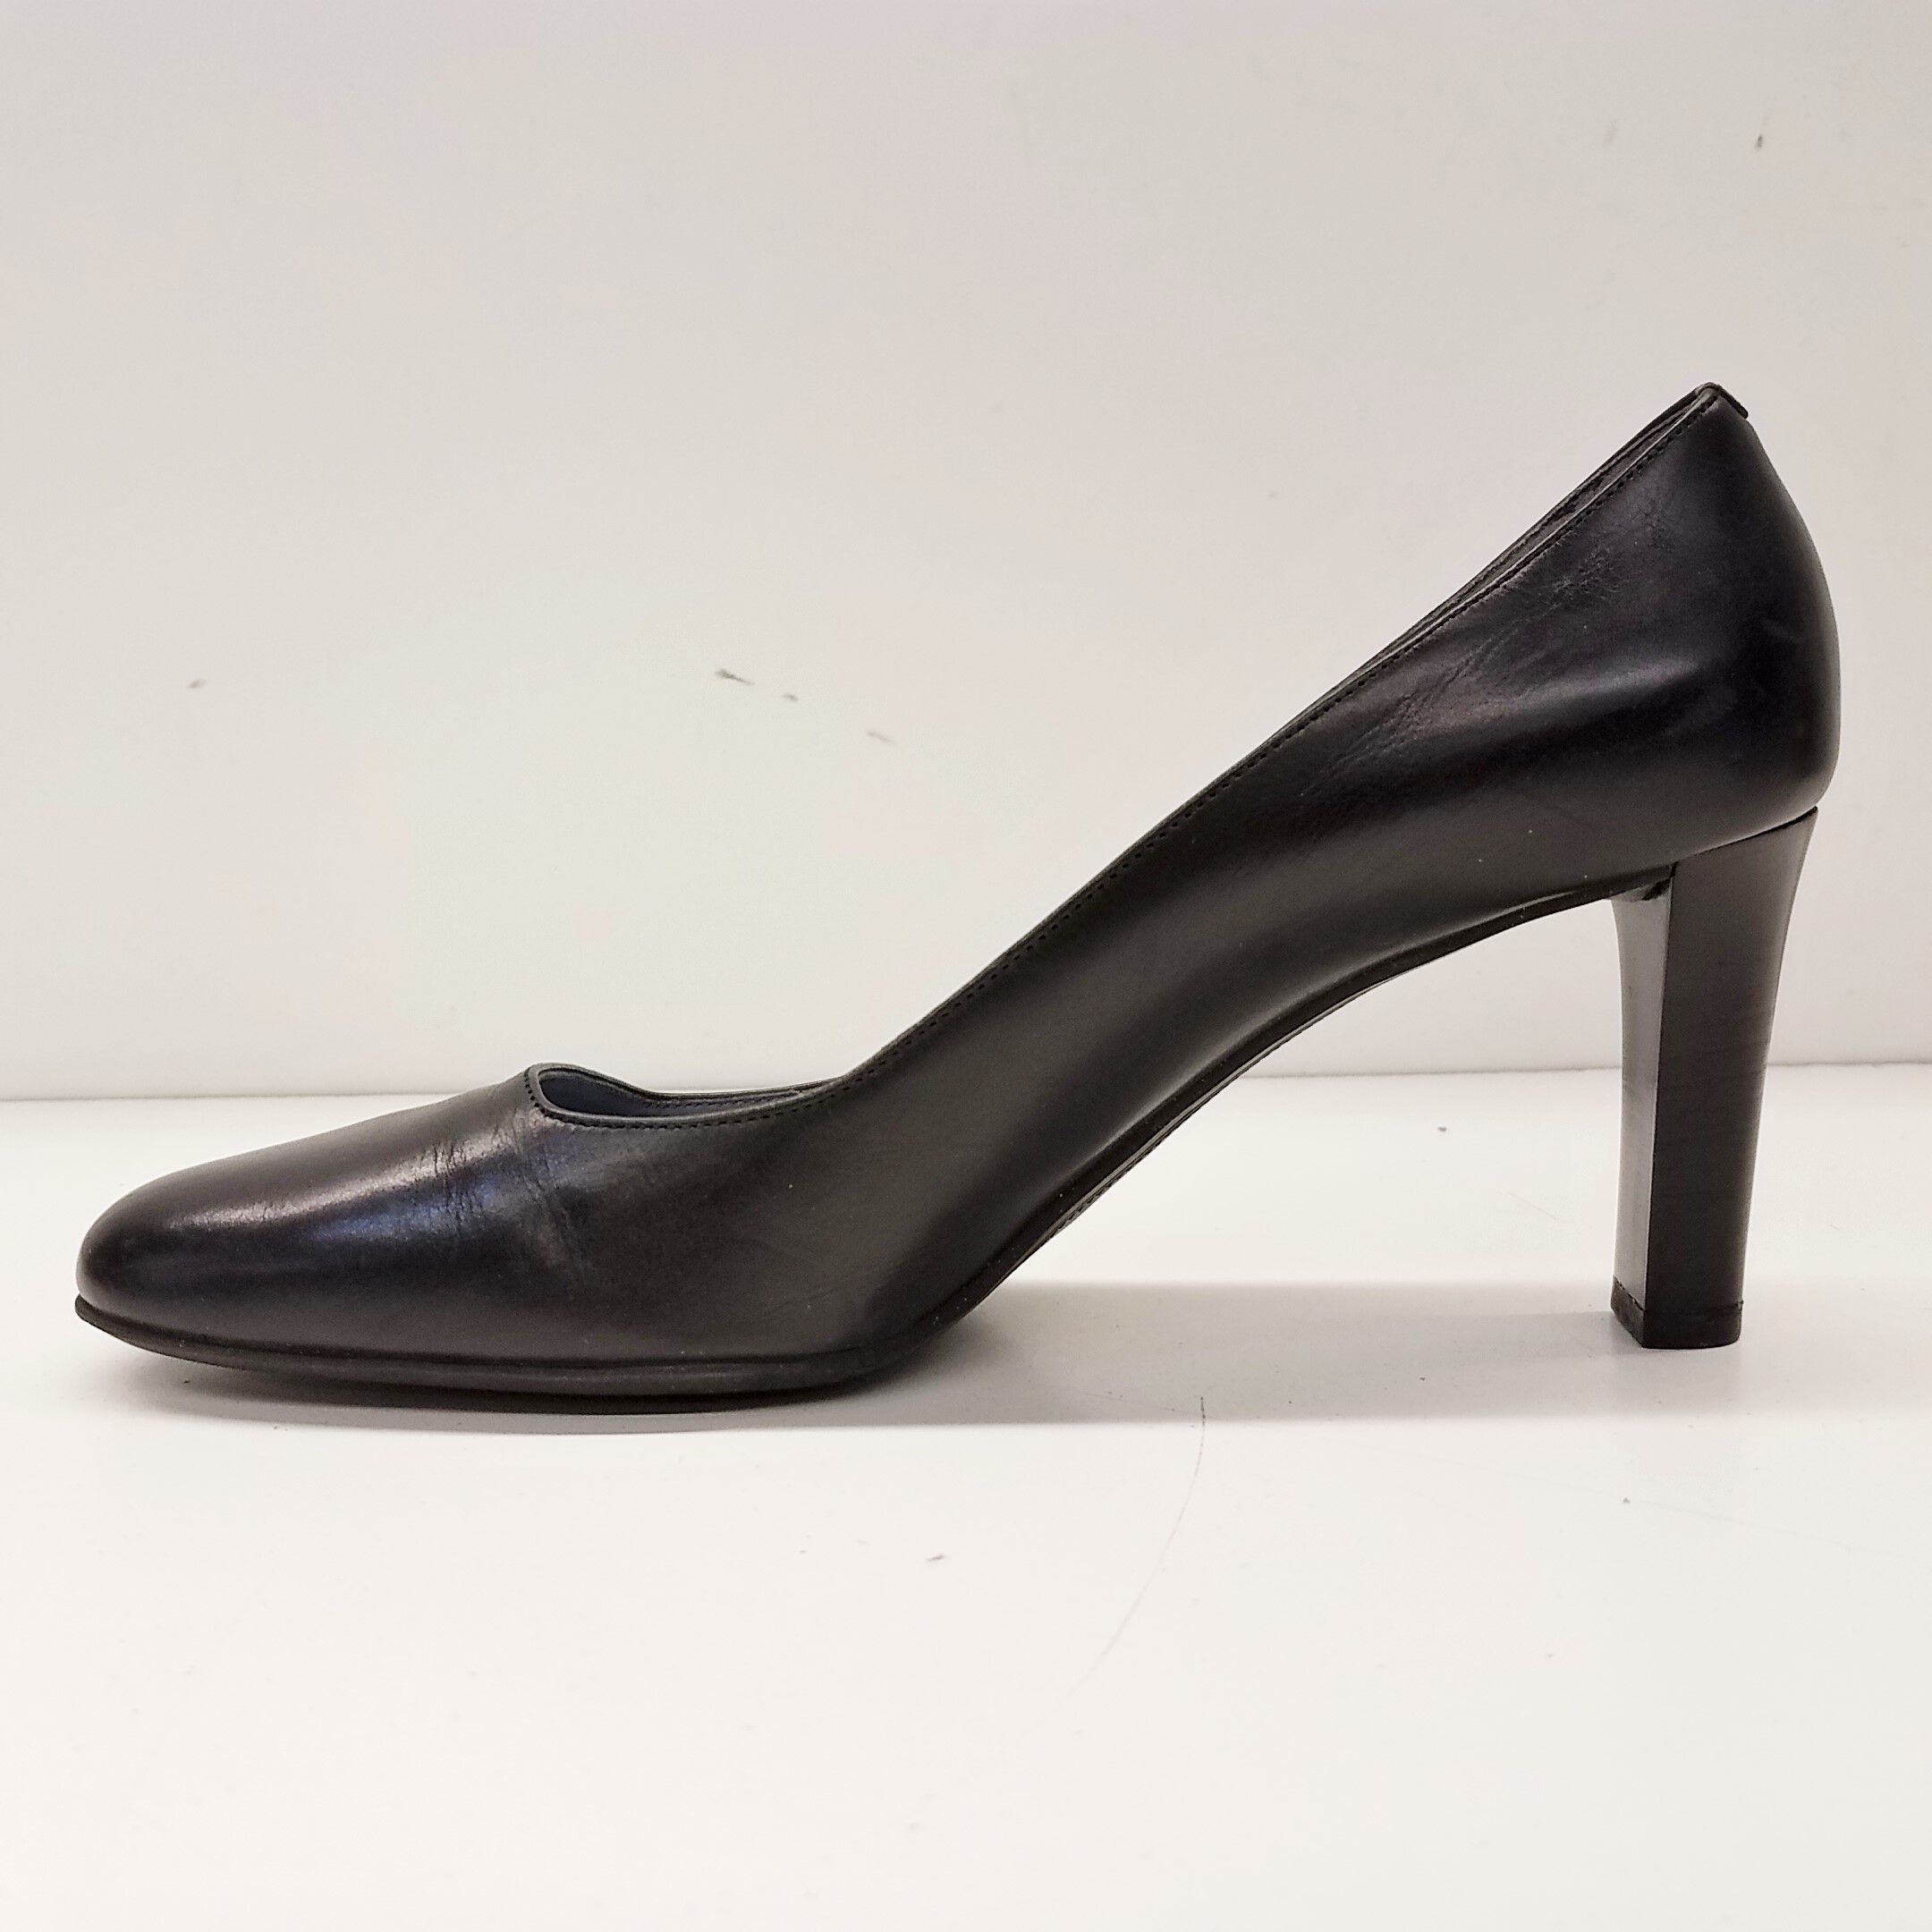 Used Unbranded SHOES 6.5 SHOES / HEELS - HIGH